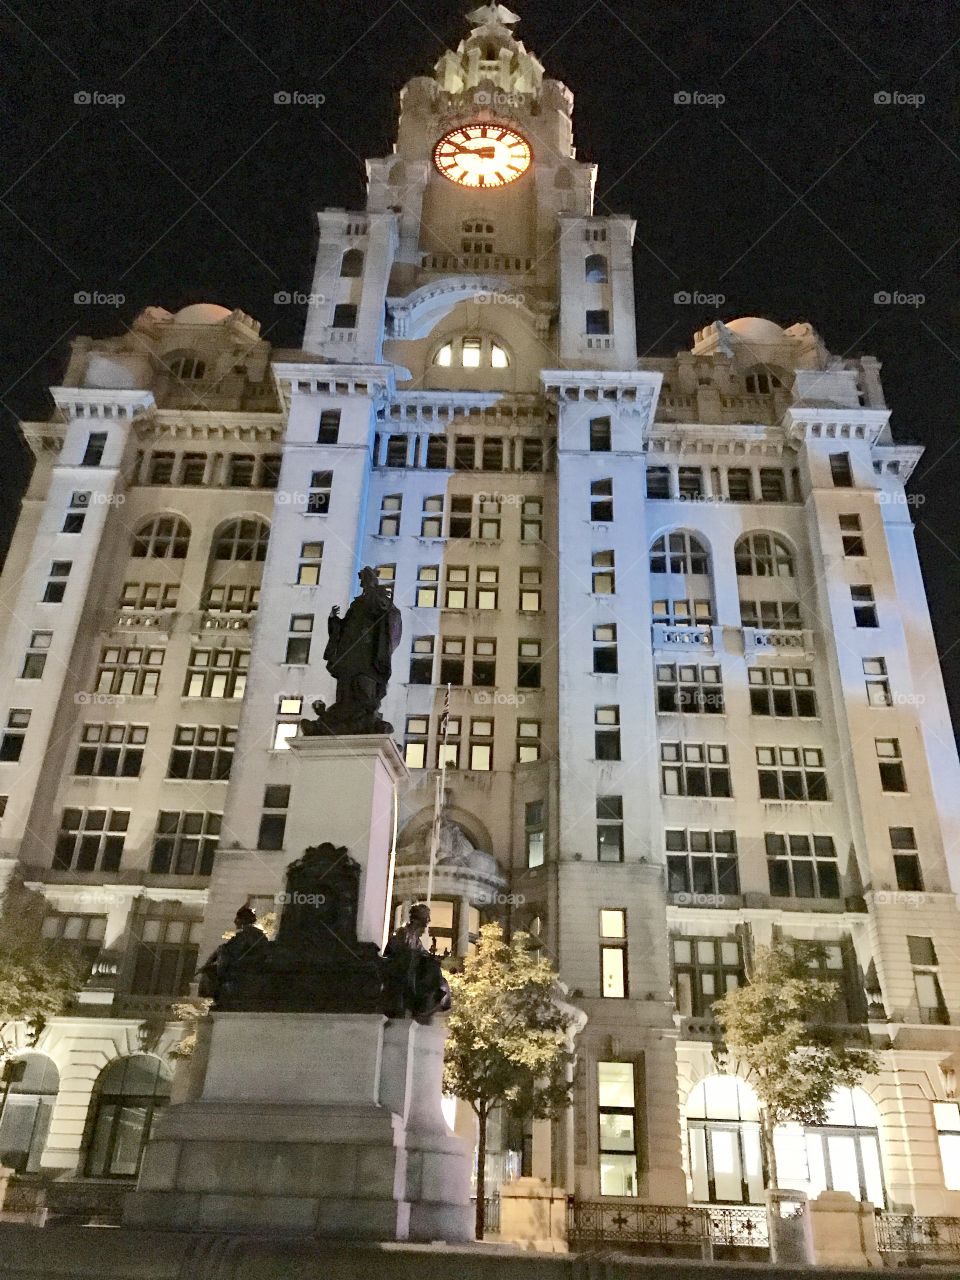 Liverpool's Liver Building at night.